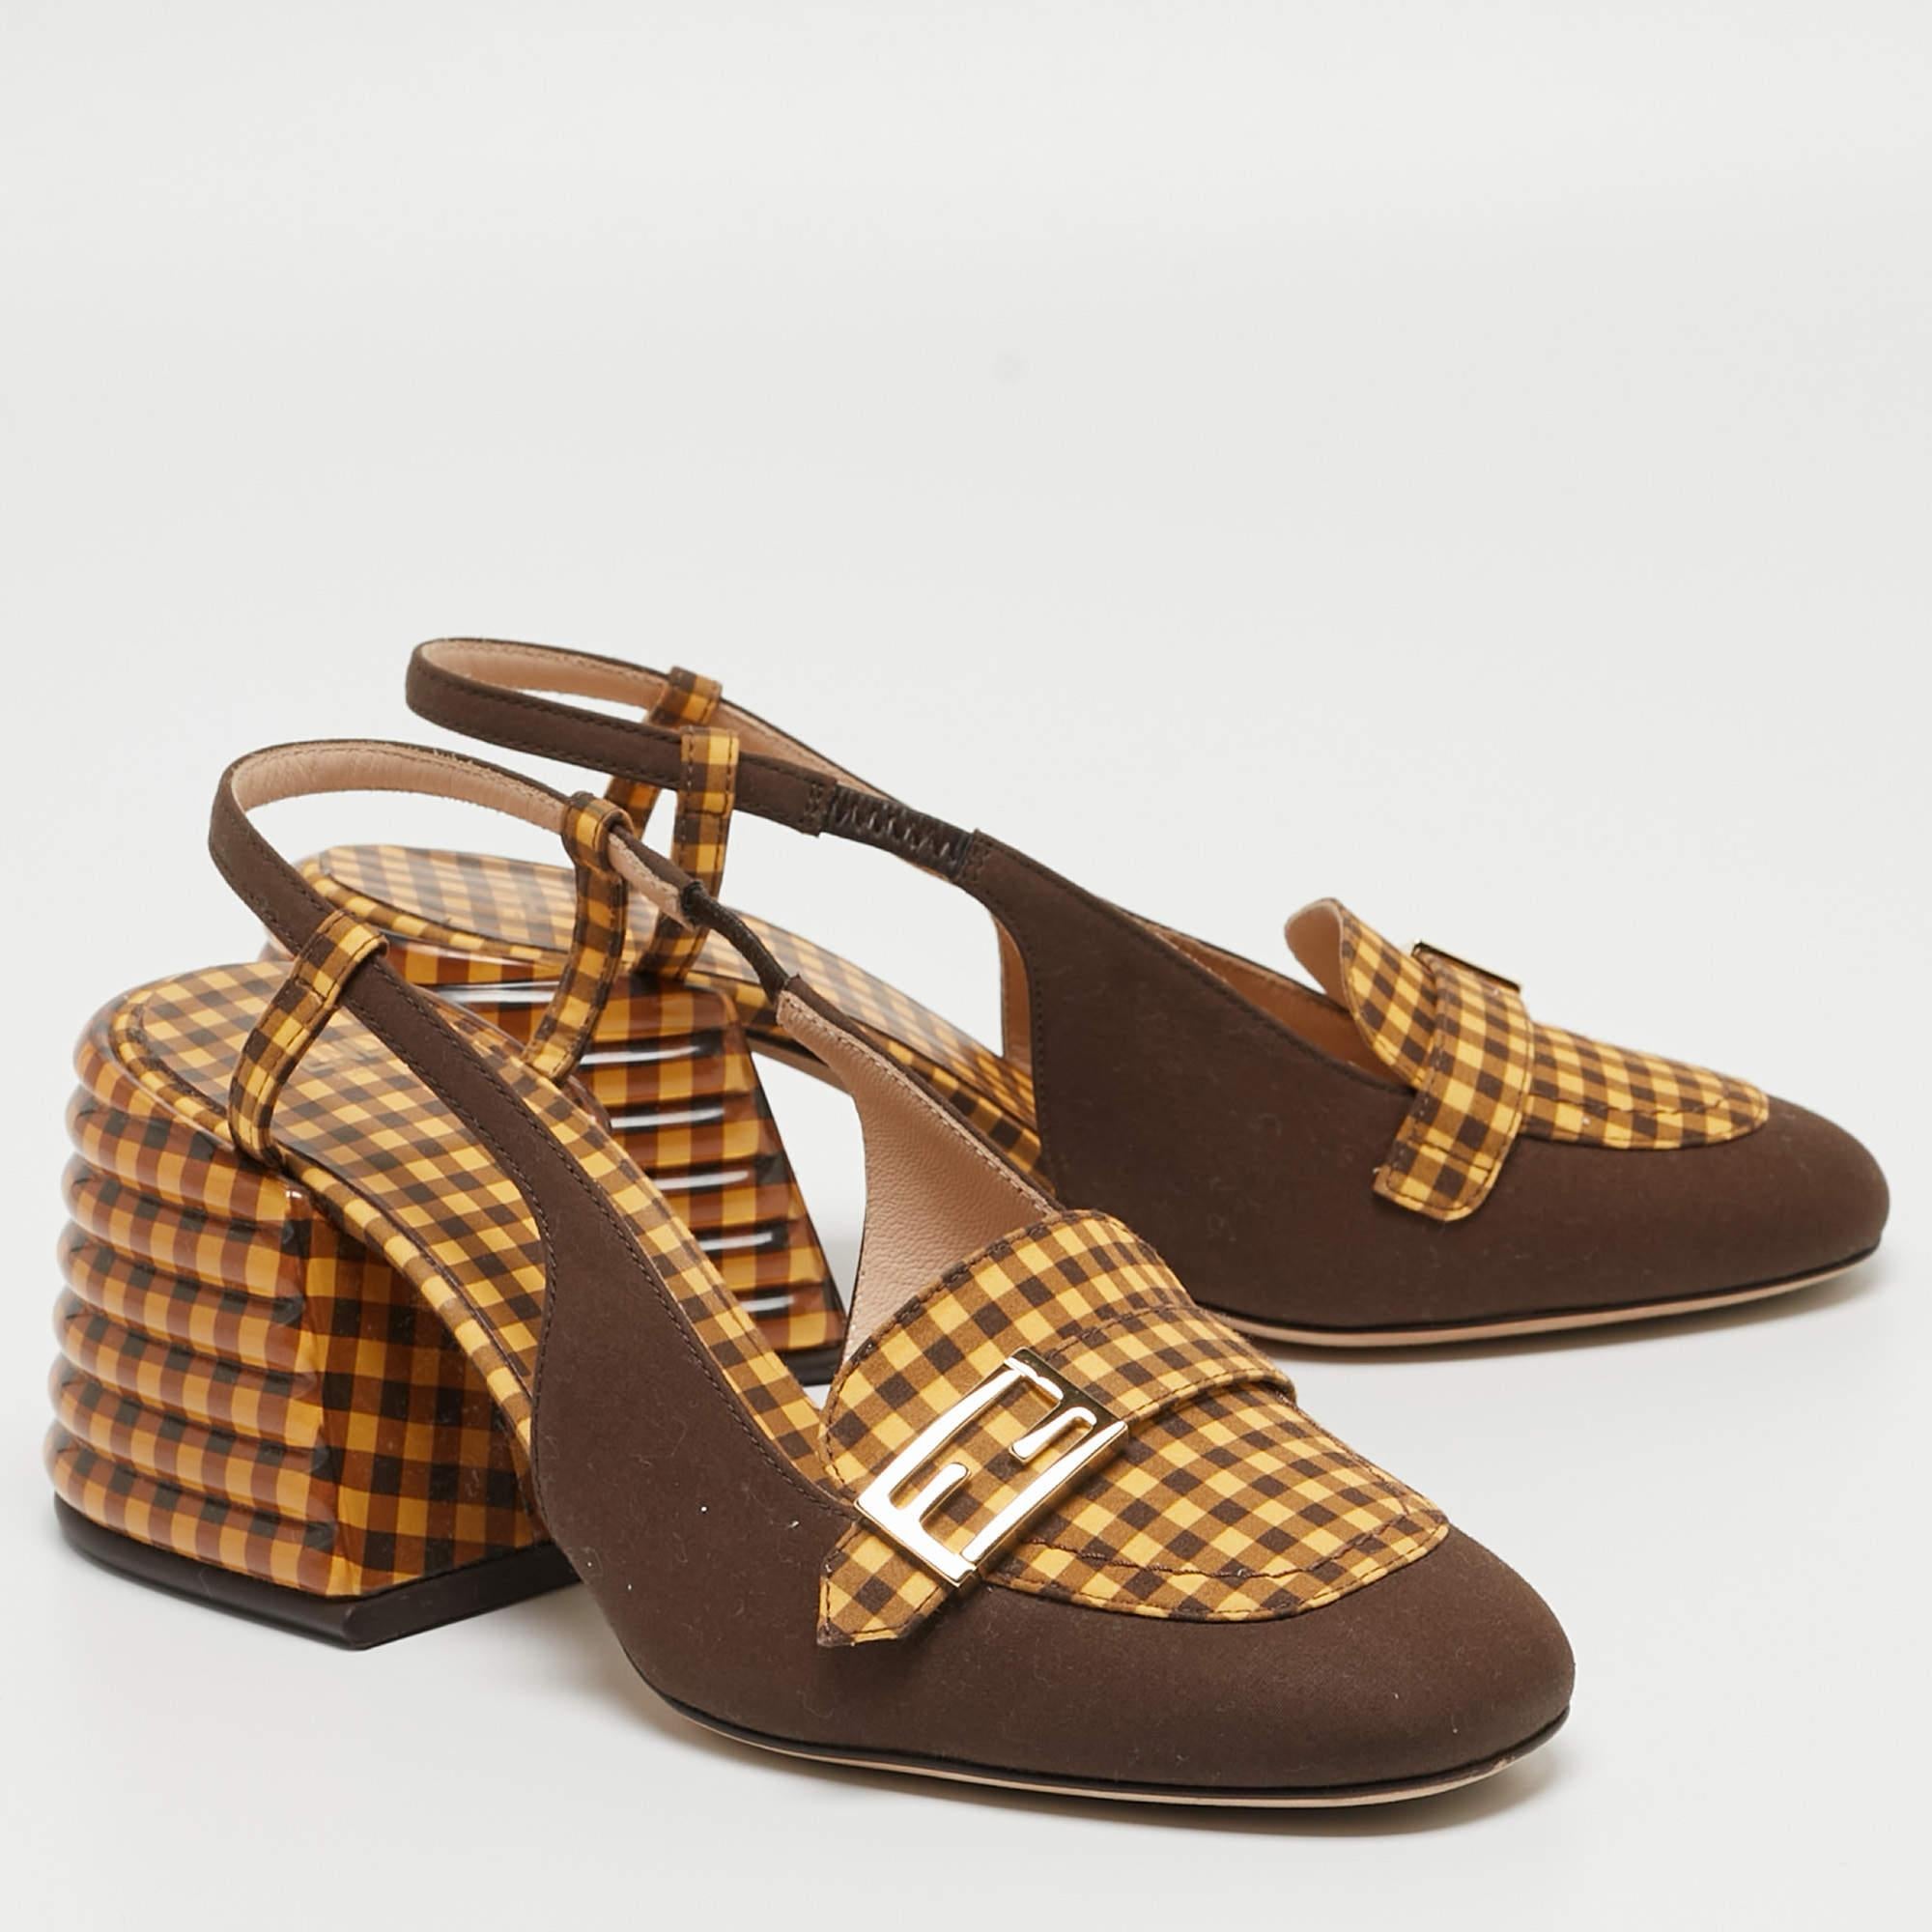 Fendi Yellow/Brown Checkered Fabric Promenade Slingback Loafer Pumps Size 36 For Sale 3